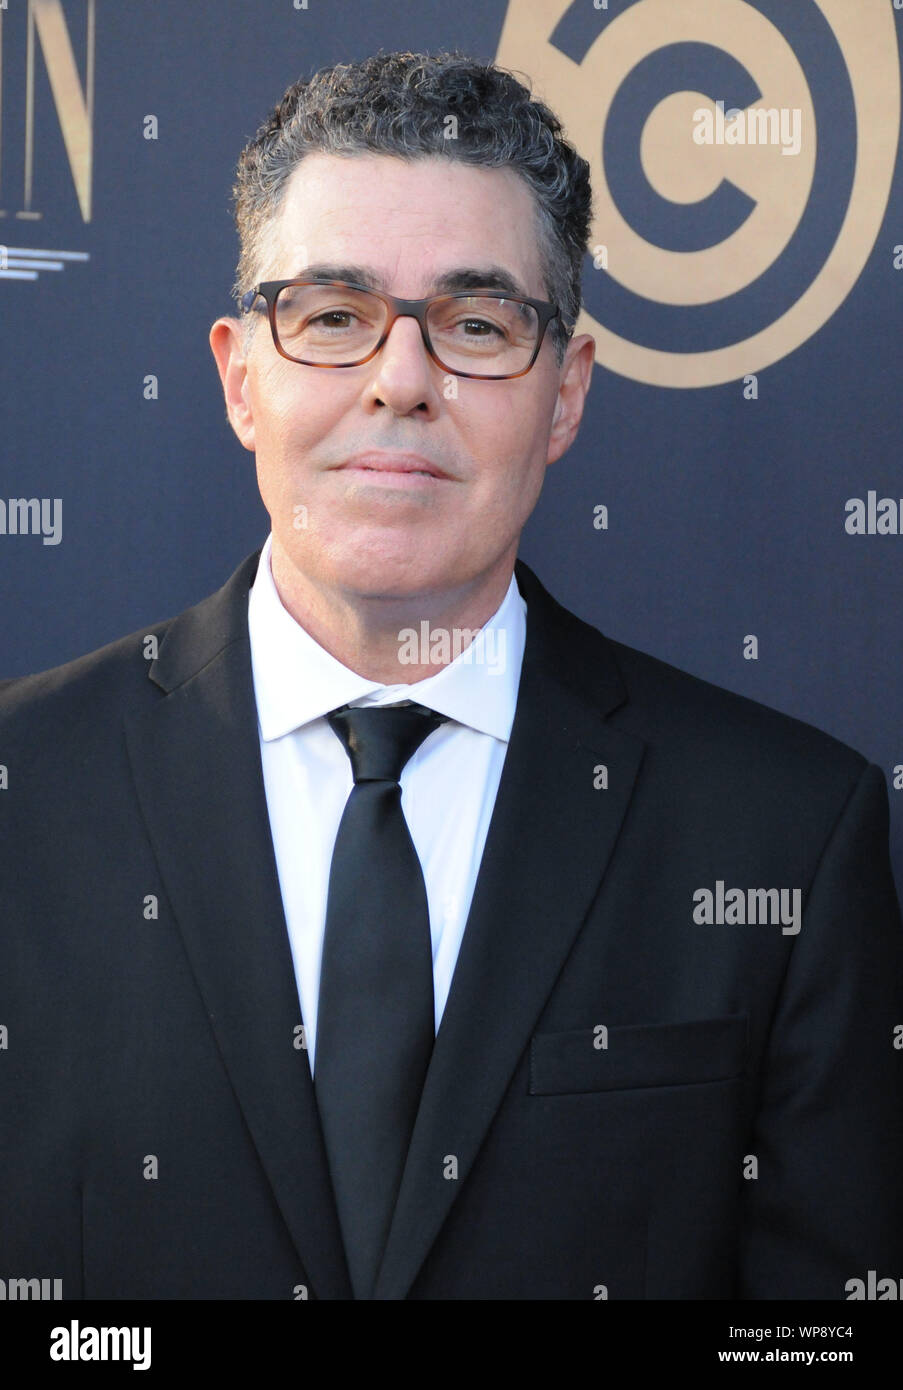 Beverly Hills, California, USA 7th September 2019 Comedian Adam Carolla attends The Comedy Central Roast of Alec Baldwin on September 7, 2019 at Saban Theatre in Beverly Hills, California, USA. Photo by Barry King/Alamy Live News Stock Photo